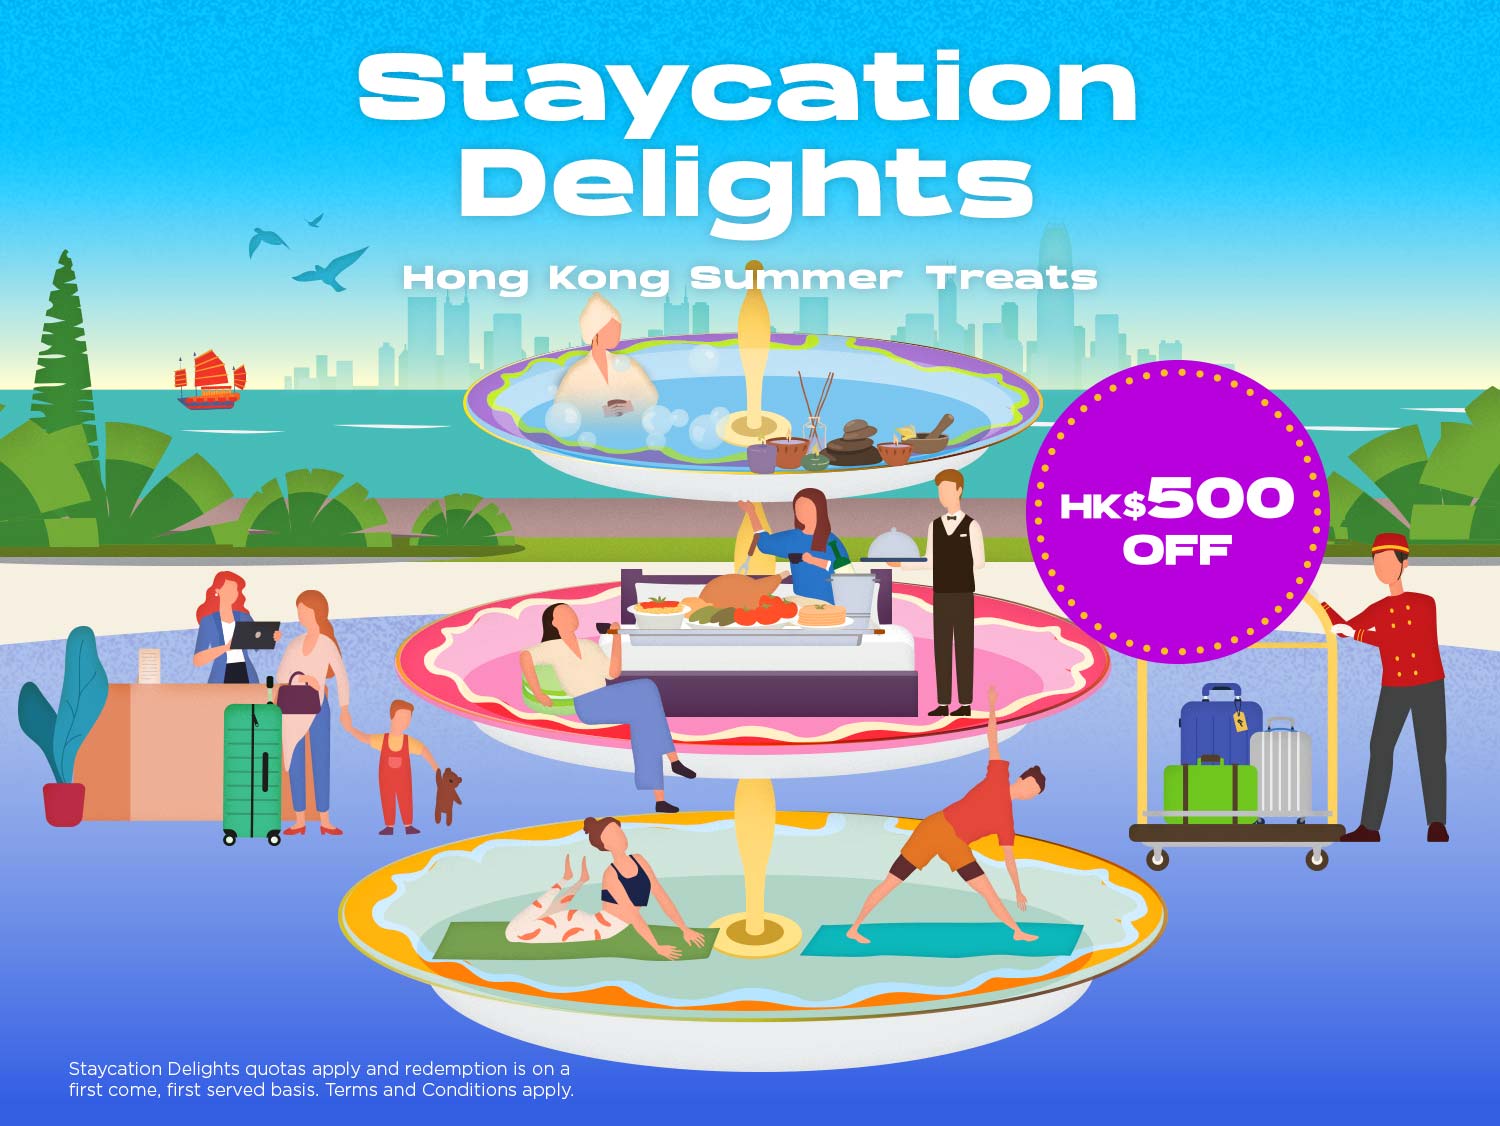 3rd Round of “Spend-to-Redeem Staycation” Programme